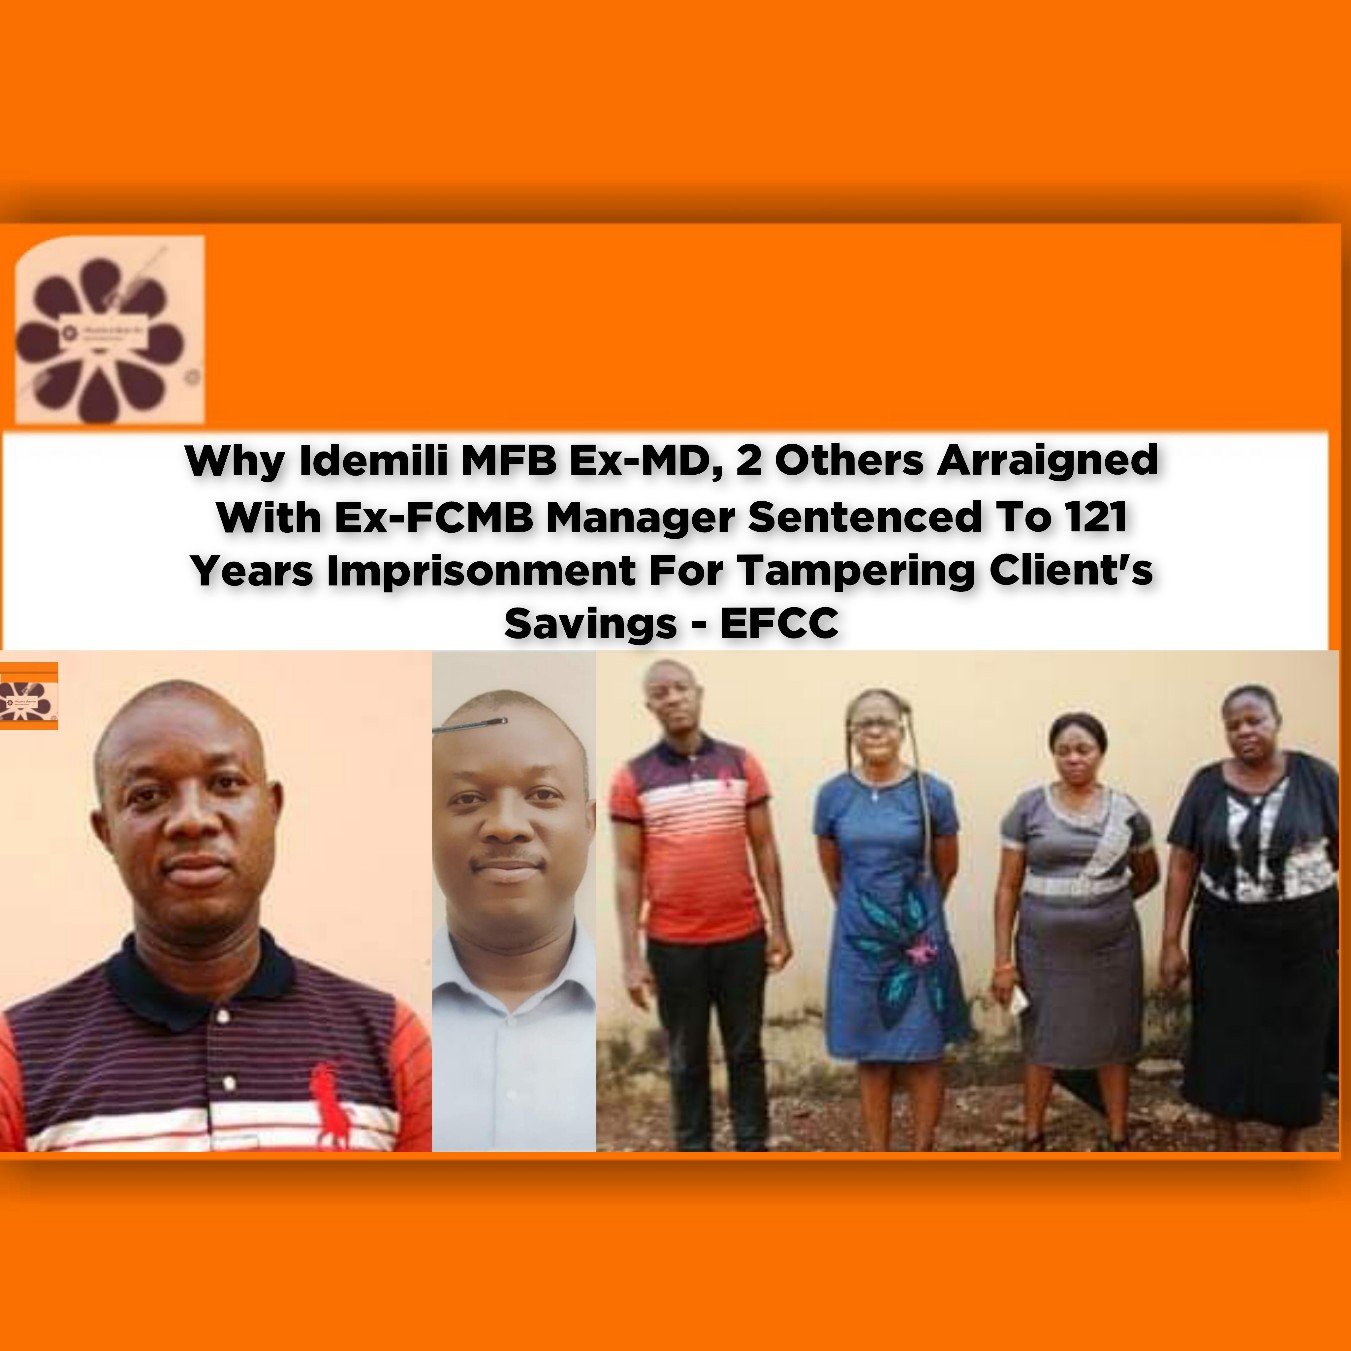 Why Idemili MFB Ex-MD, 2 Others Arraigned With Ex-FCMB Manager Sentenced To 121 Years Imprisonment For Tampering Client's Savings - EFCC ~ OsazuwaAkonedo #Doctors